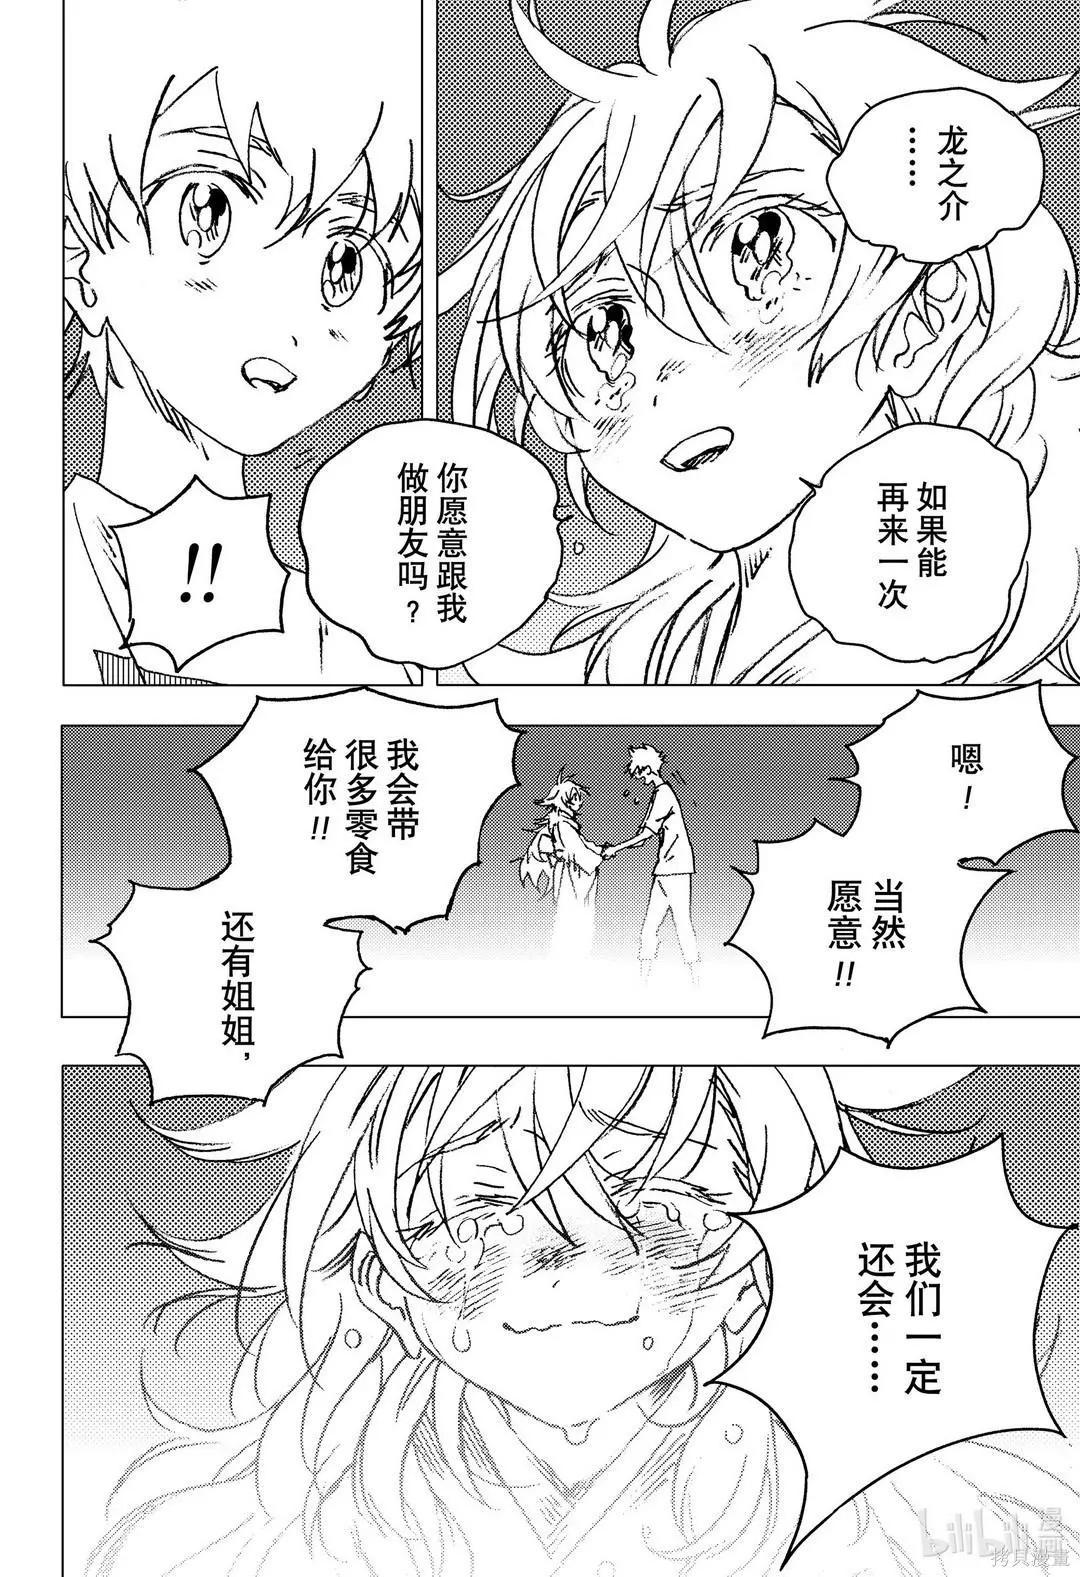 Summer time rendering - 第138話 - 3